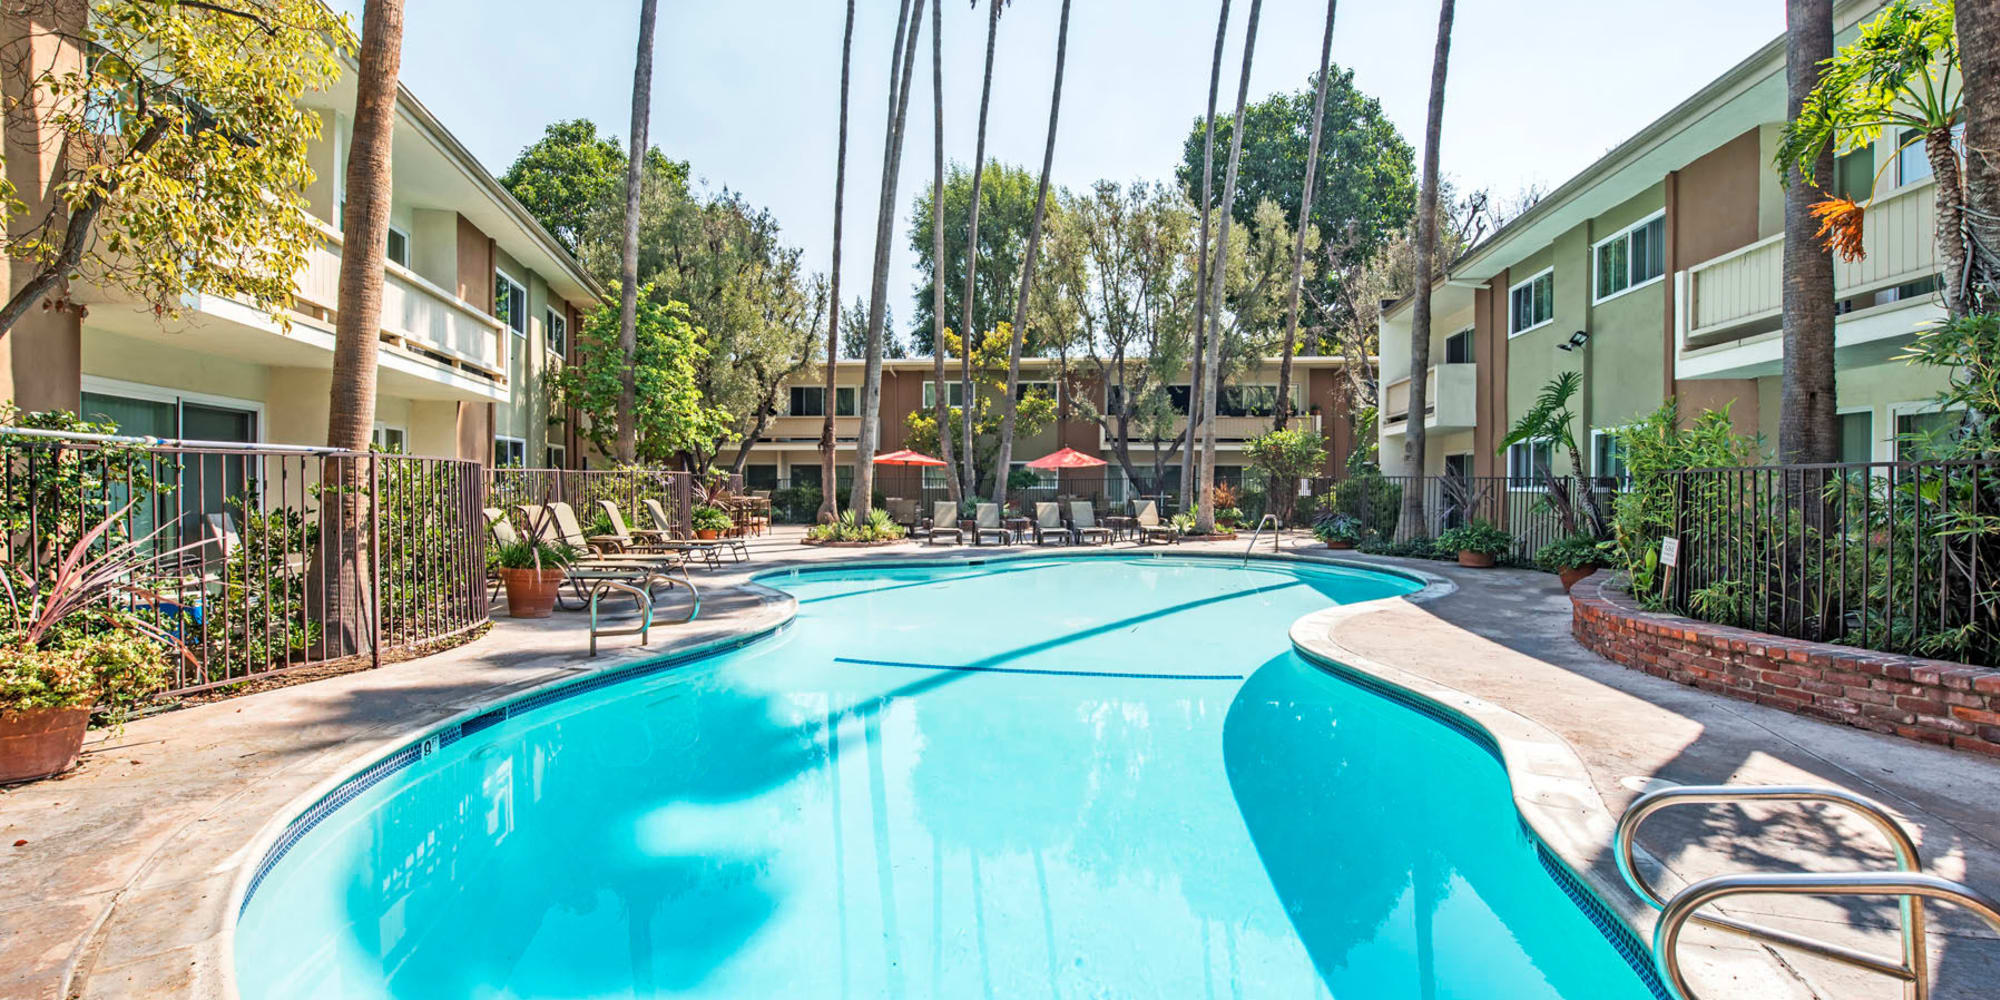 Resort-style swimming pool surrounded by palm trees at Villa Vicente in Los Angeles, California